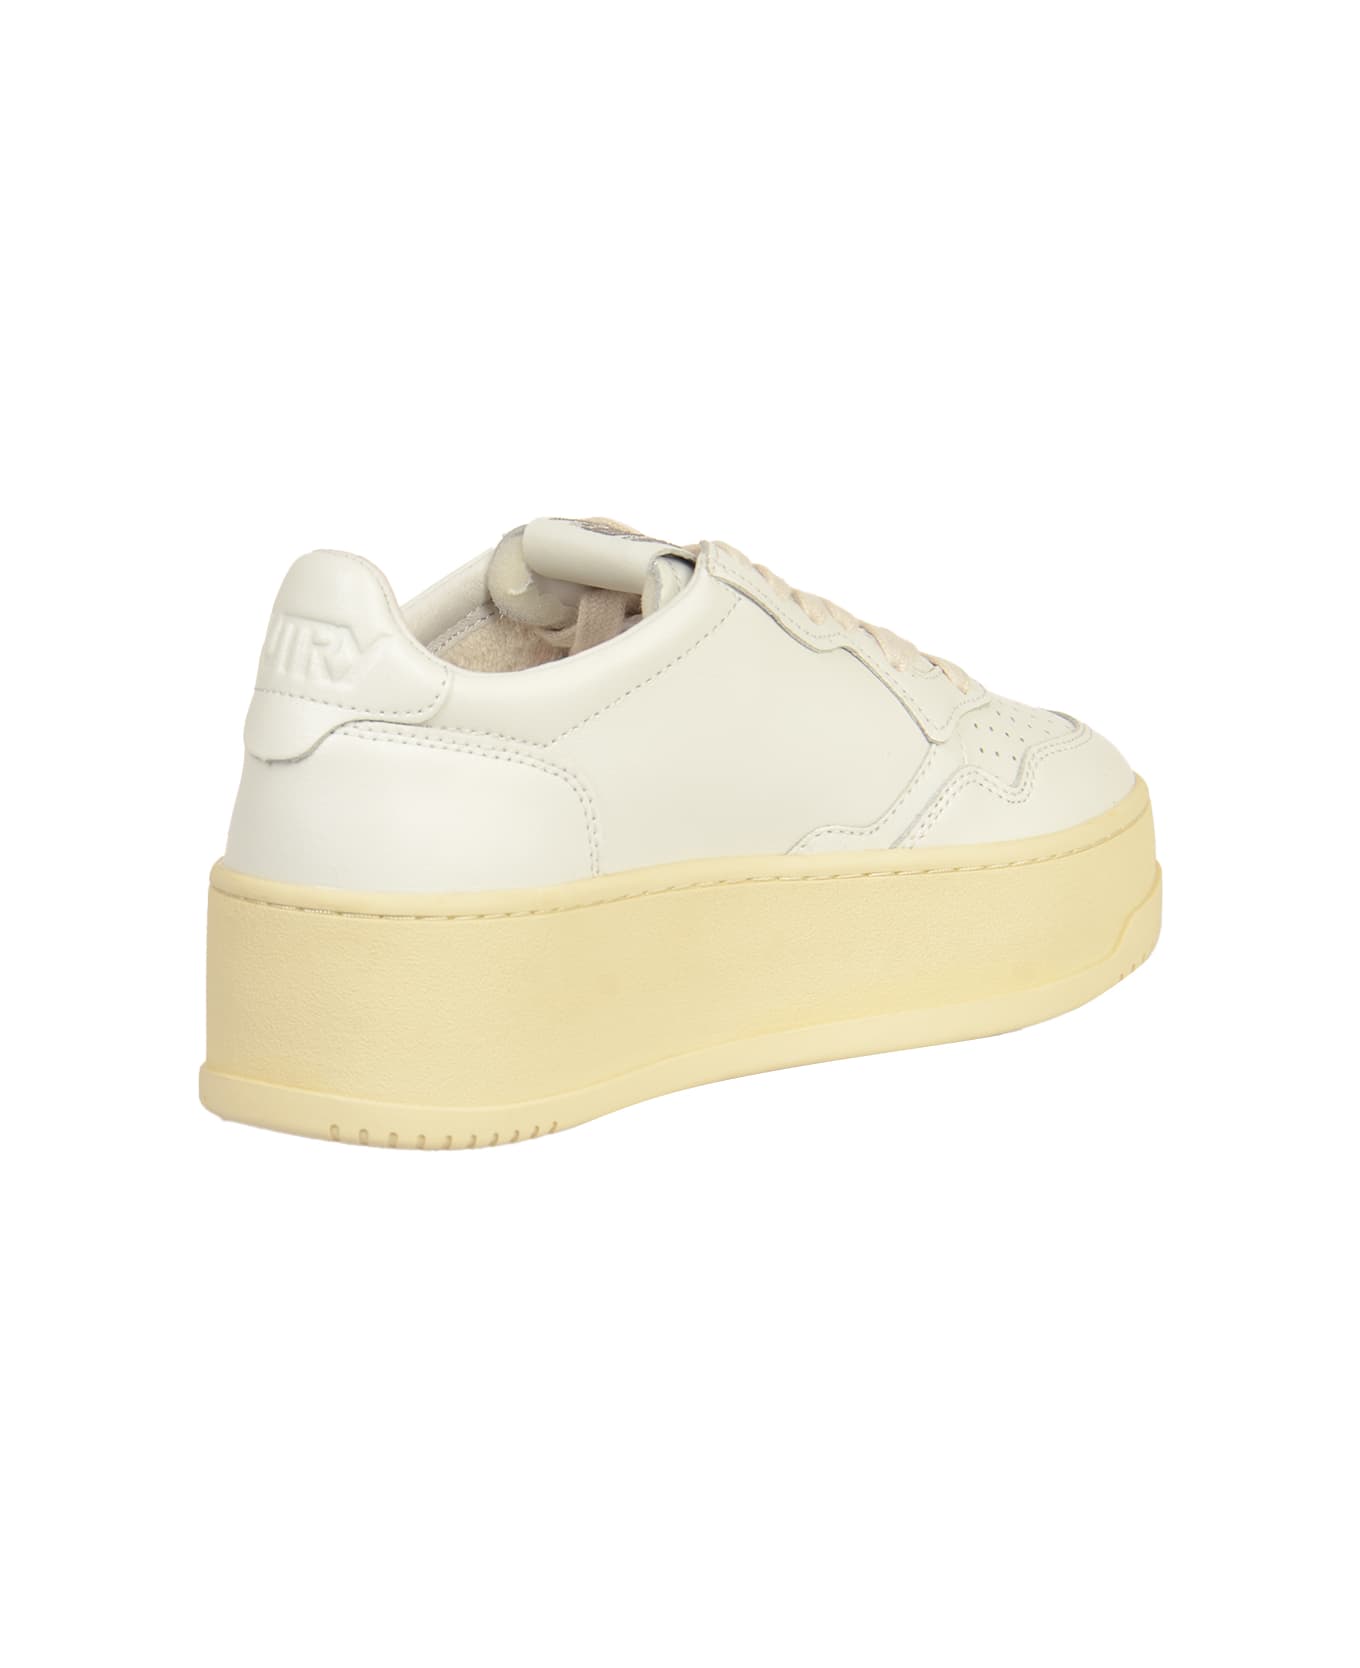 Autry Platform Low Sneakers - White